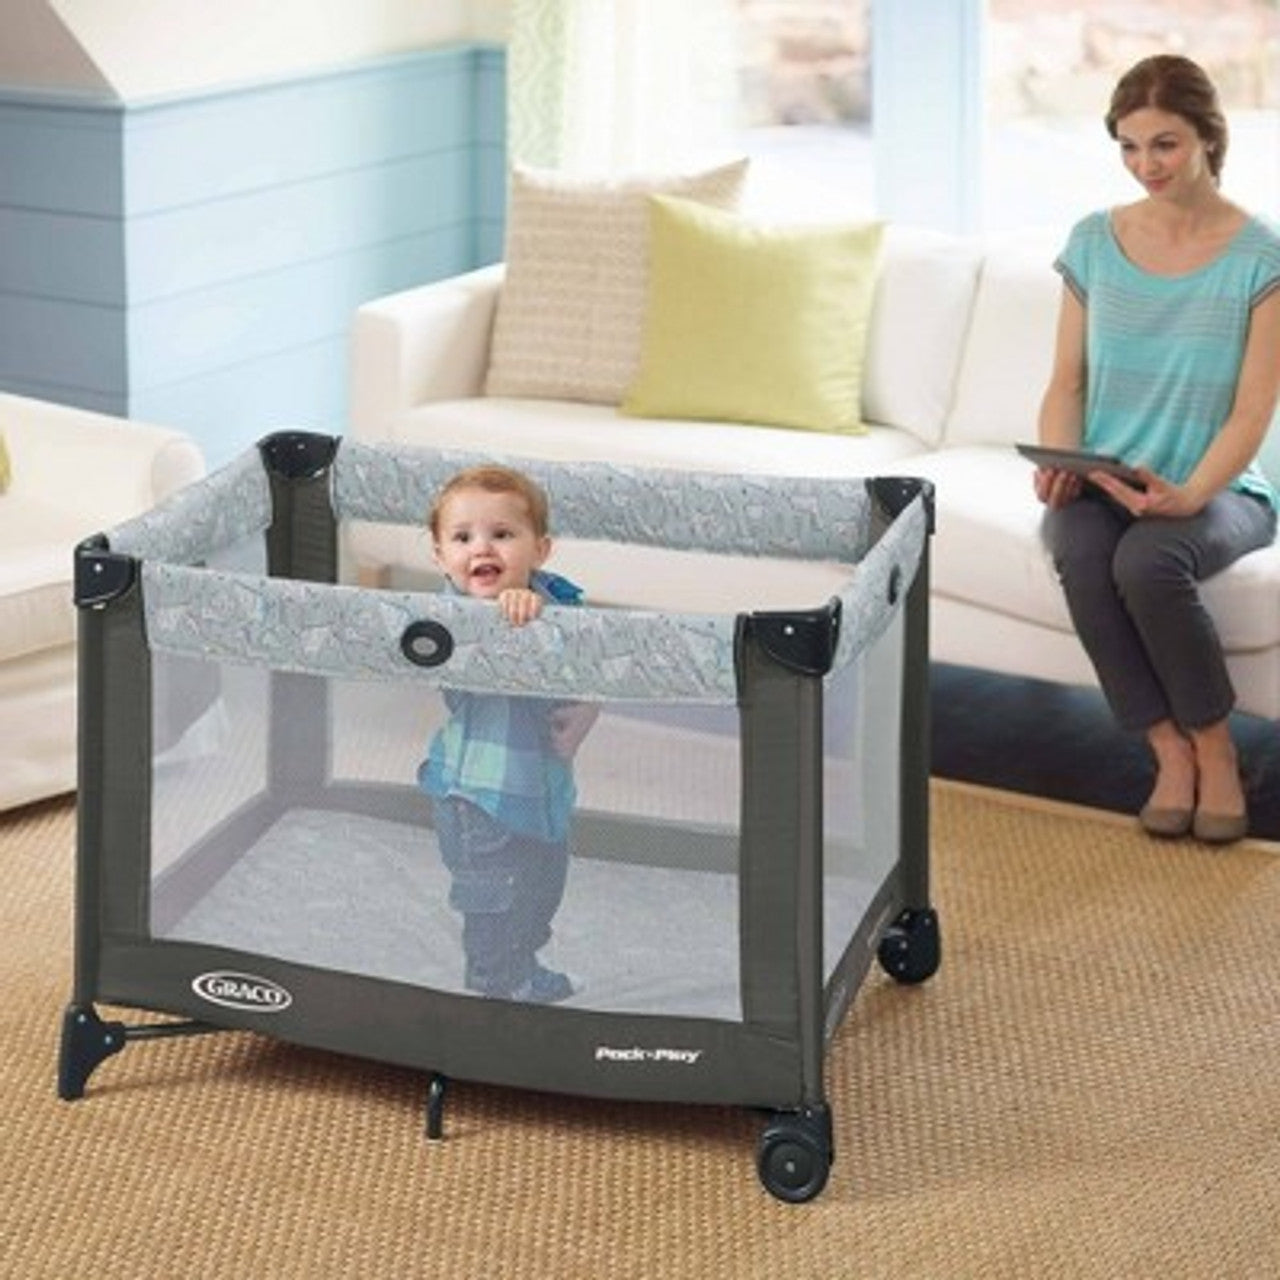 New - Graco Pack 'n Play Portable Playard - Marty